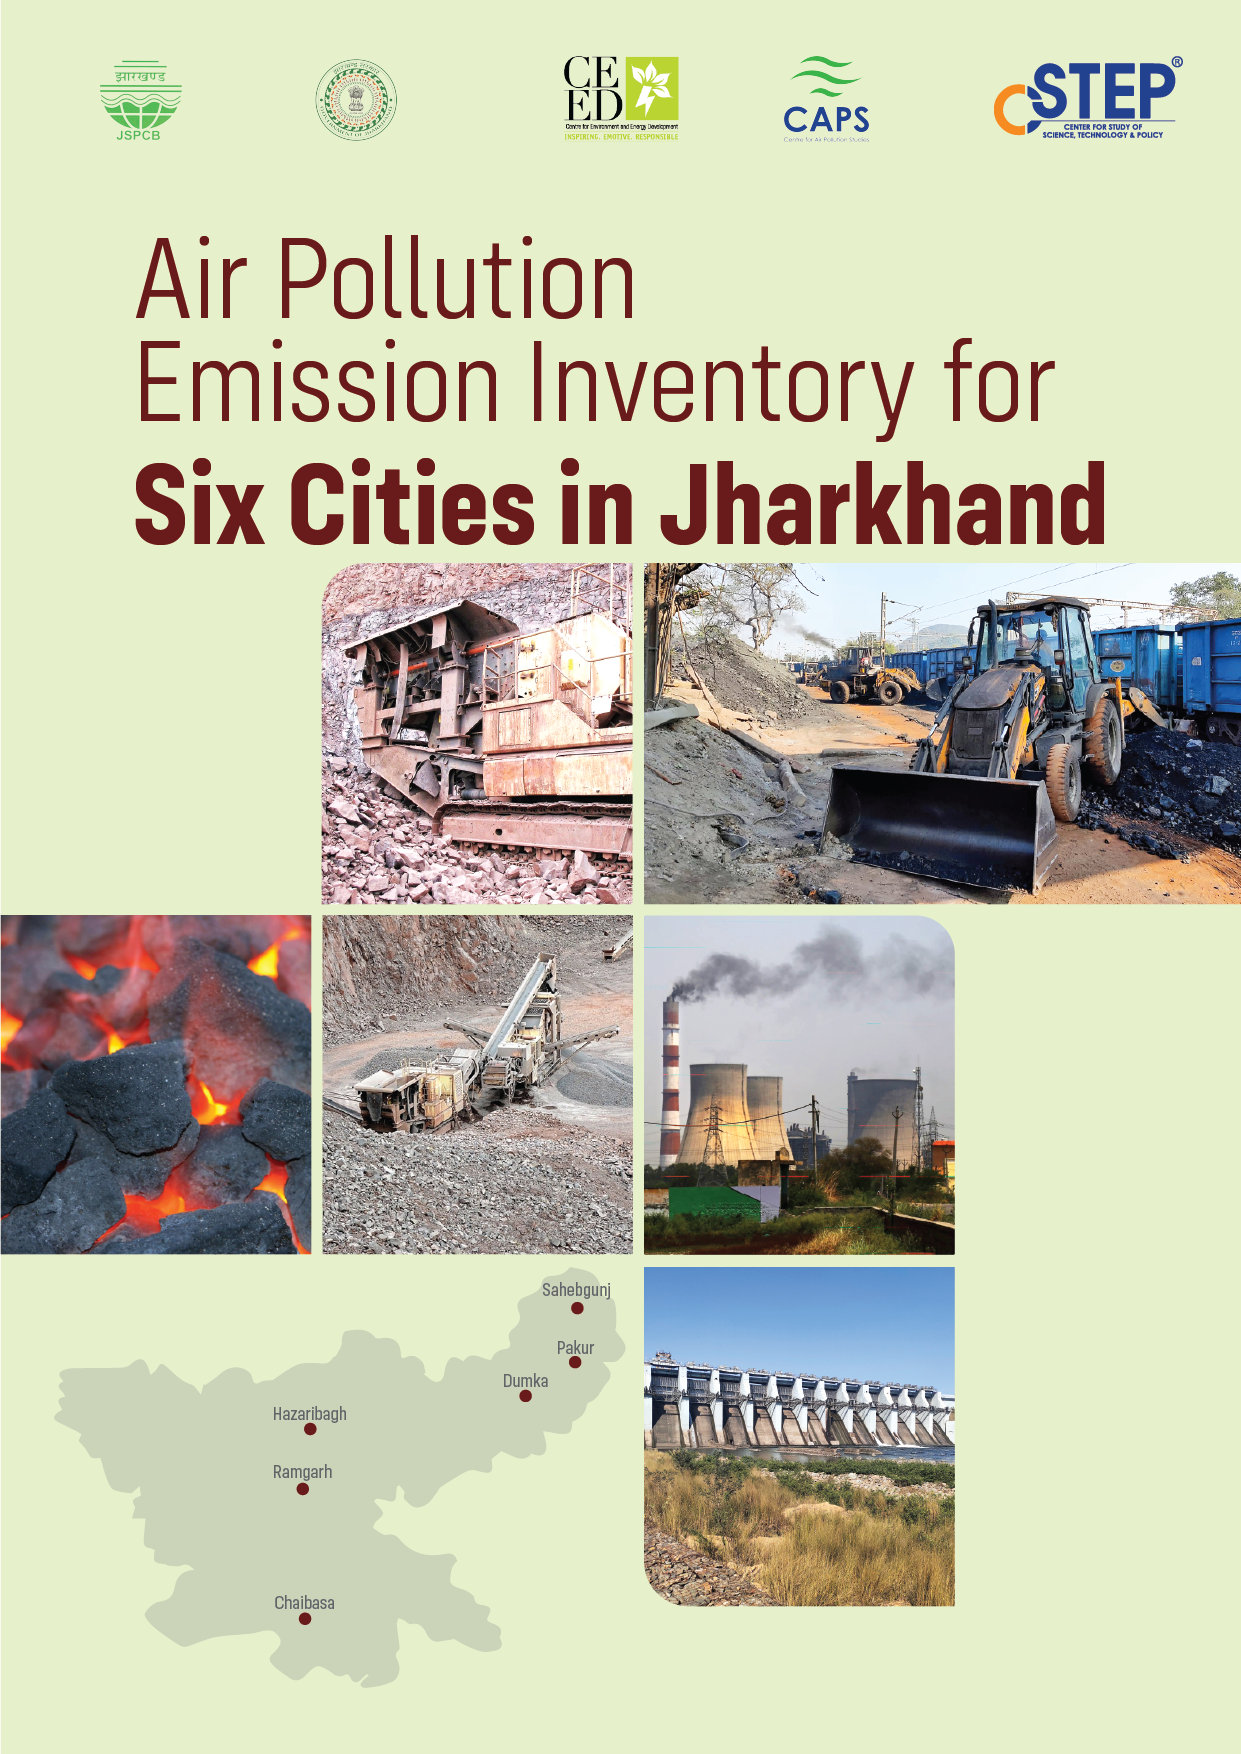 Air Pollution Emission Inventory for Six Cities in Jharkhand